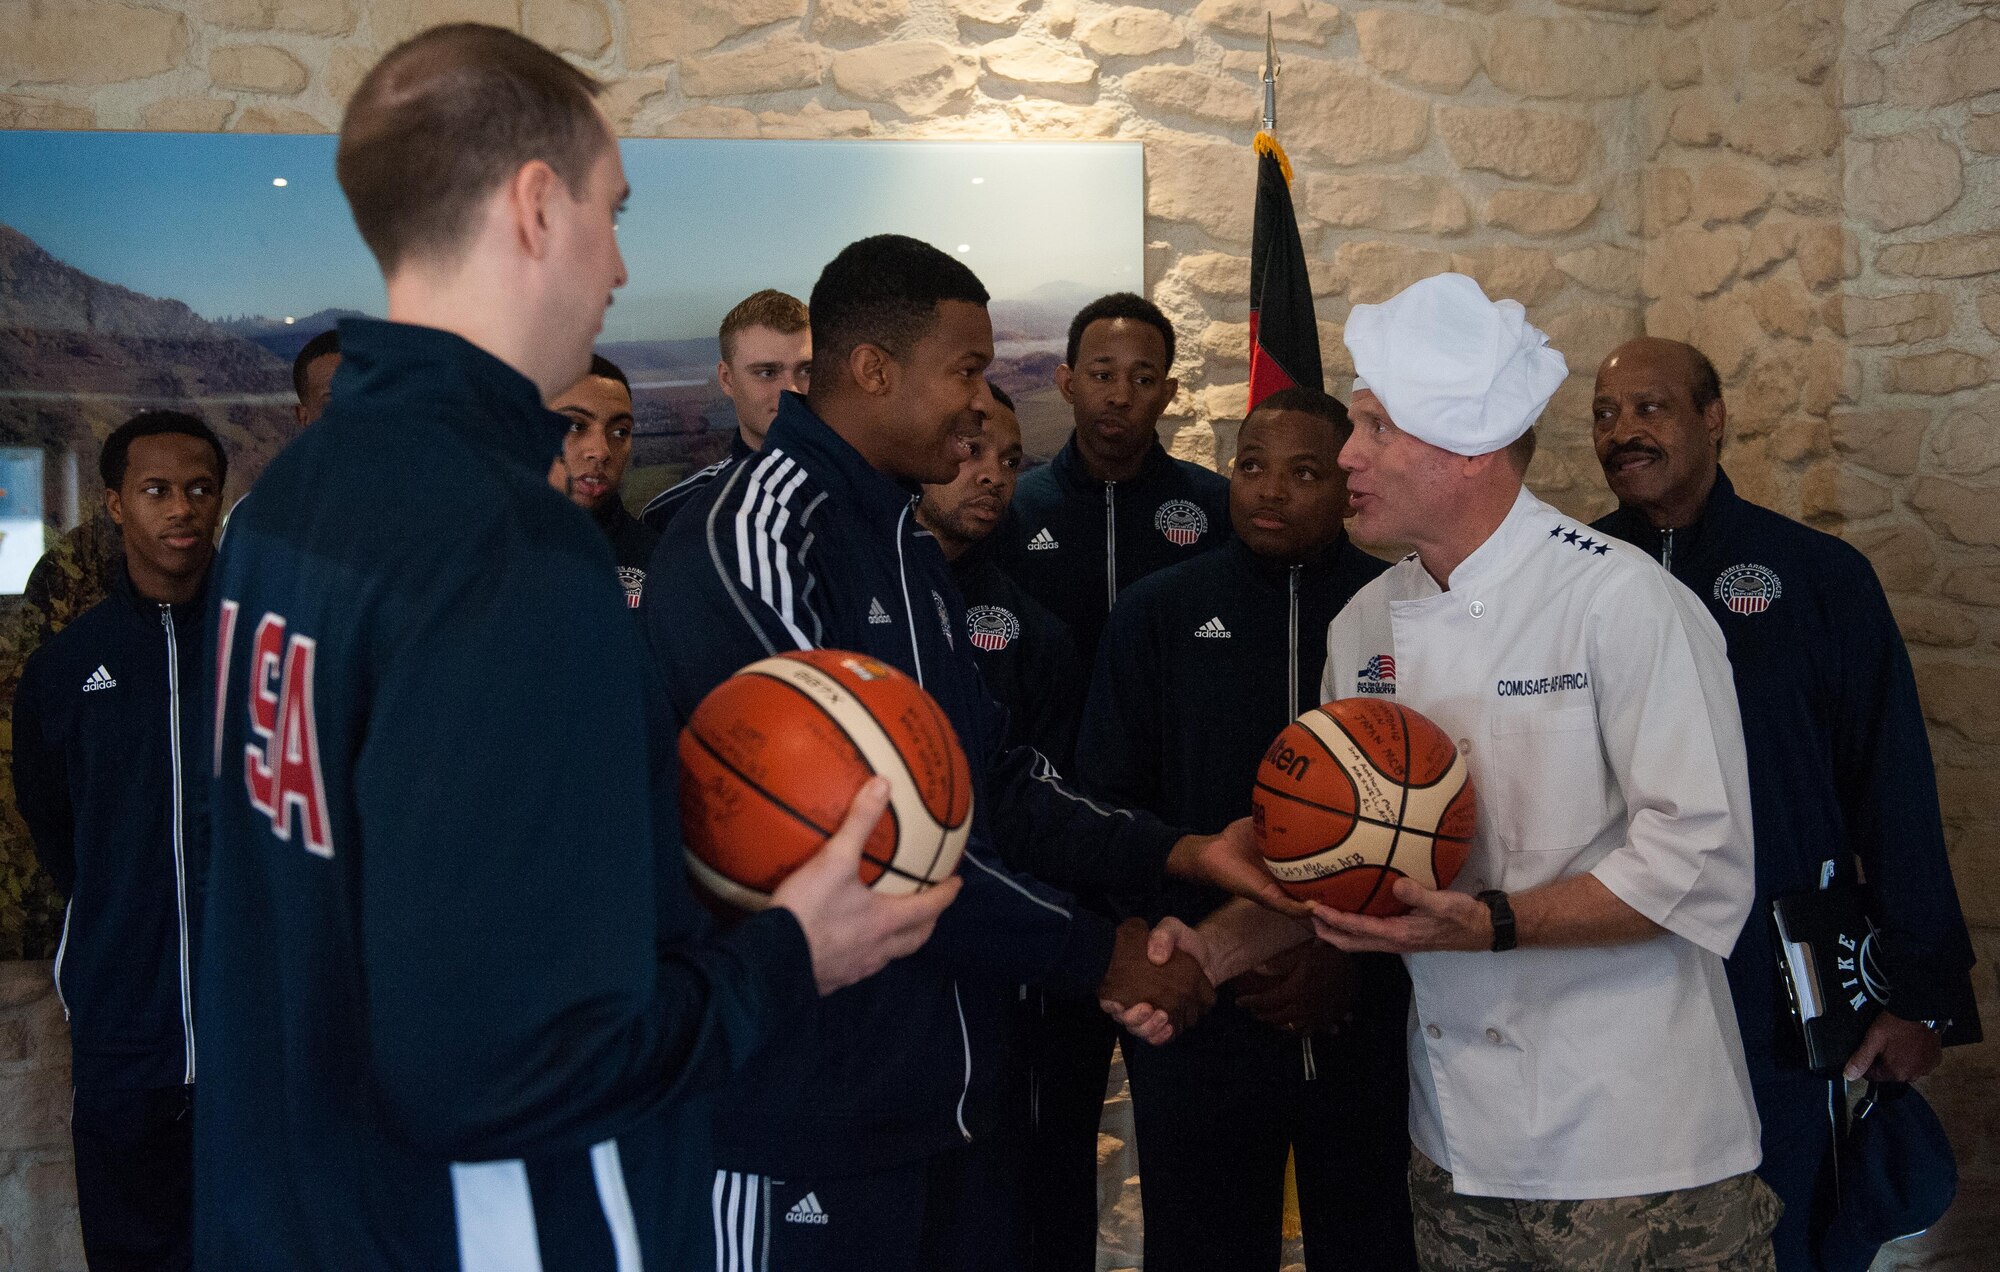 Gen. Tod D. Wolters, U.S. Air Forces in Europe and Air Forces Africa commander, receives an honorary signed basketball from the Armed Forces Basketball Team during a Thanksgiving meal at Ramstein Air Base, Germany, Nov. 24, 2016. Leaders gathered to serve holiday meals to Airmen and their families and to wish everyone a safe and happy holiday. In the U.S., the modern Thanksgiving holiday tradition can trace its origins back to 1621 in the heart of a newly-founded city called Plymouth in present-day Massachusetts. However, the first nationwide Thanksgiving proclamation was made by the first president of the U.S., George Washington, in 1789. Since then, the holiday has been celebrated by an entire nation to recount the blessings of the year. (U.S. Air Force photo by Airman 1st Class Lane T. Plummer)